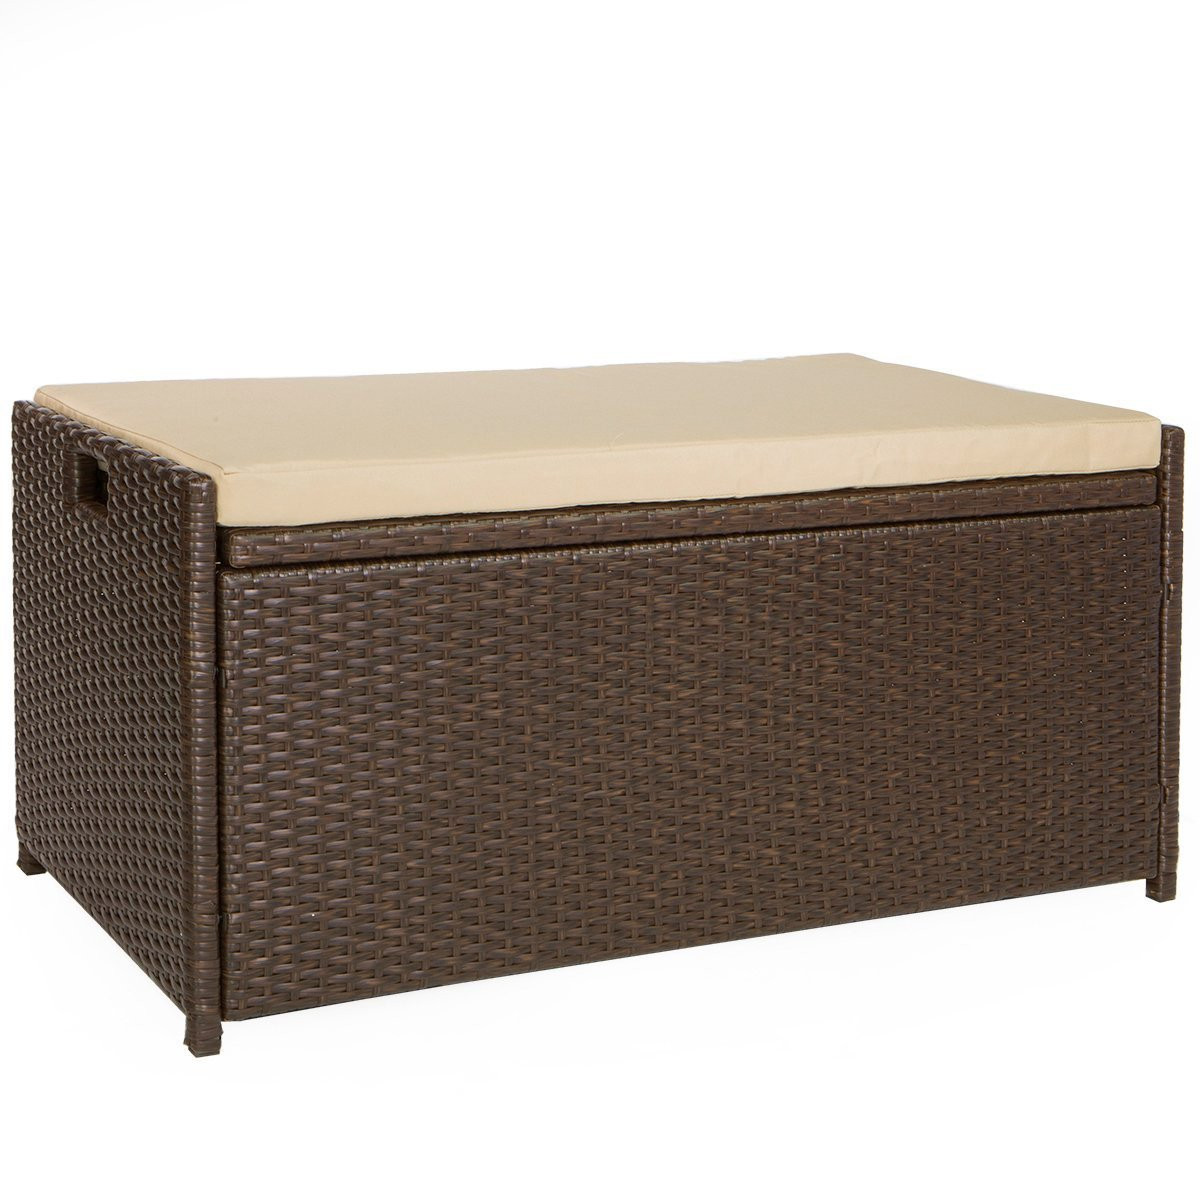 Outdoor Storage Bench With Cushion
 Victoria Young Resin Wicker Deck Box Storage Bench